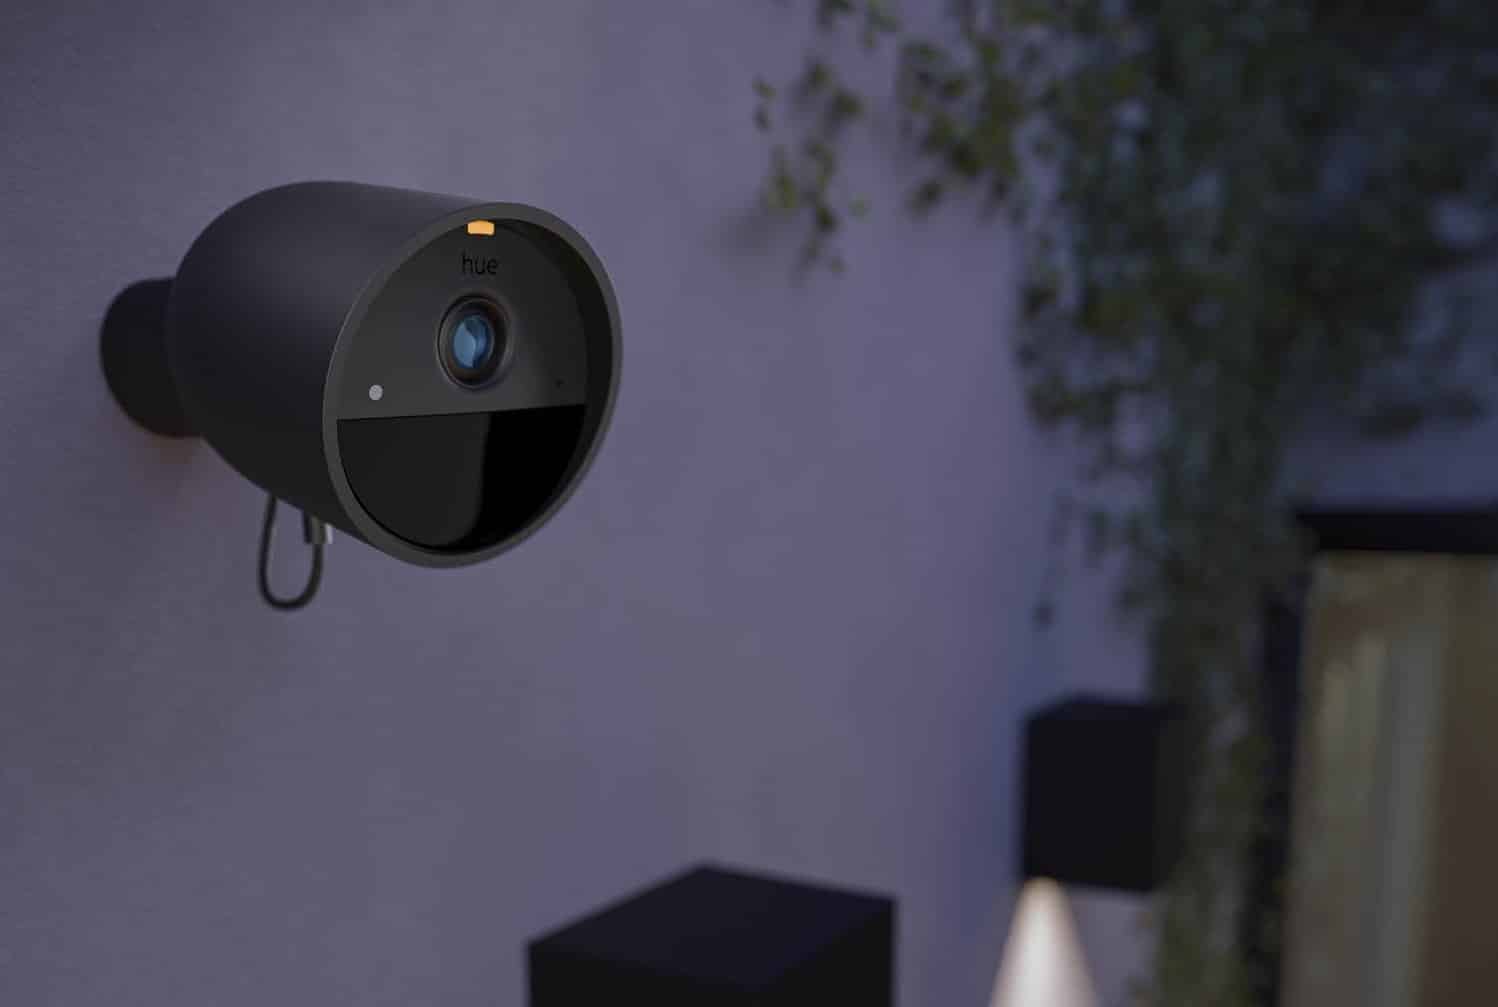 Hueblog: Philips Hue Secure Cameras: The most important answers